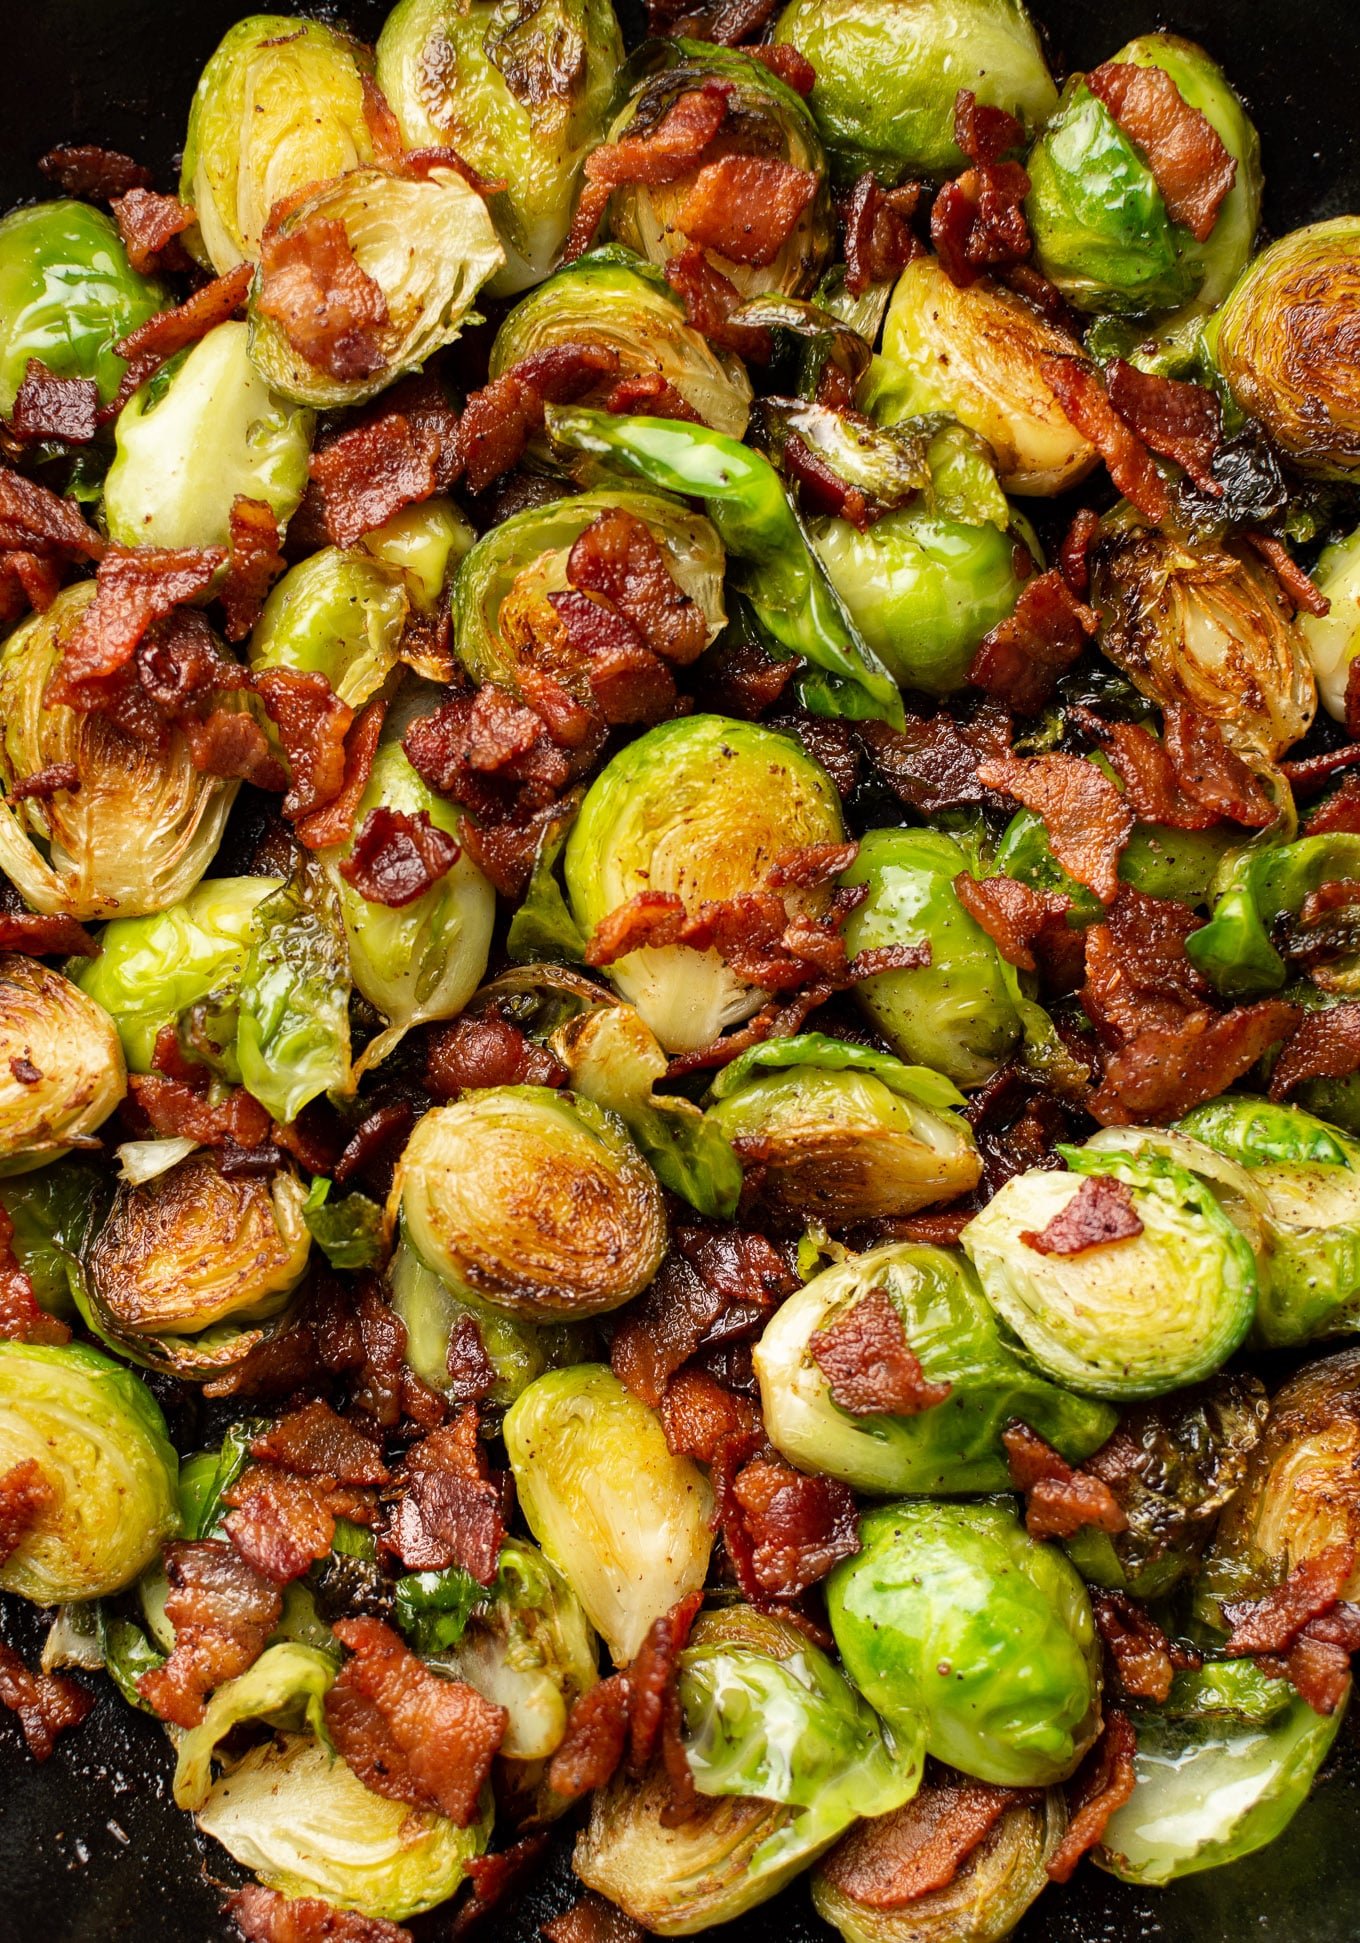 https://www.saltandlavender.com/wp-content/uploads/2018/09/brussels-sprouts-and-bacon-1.jpg